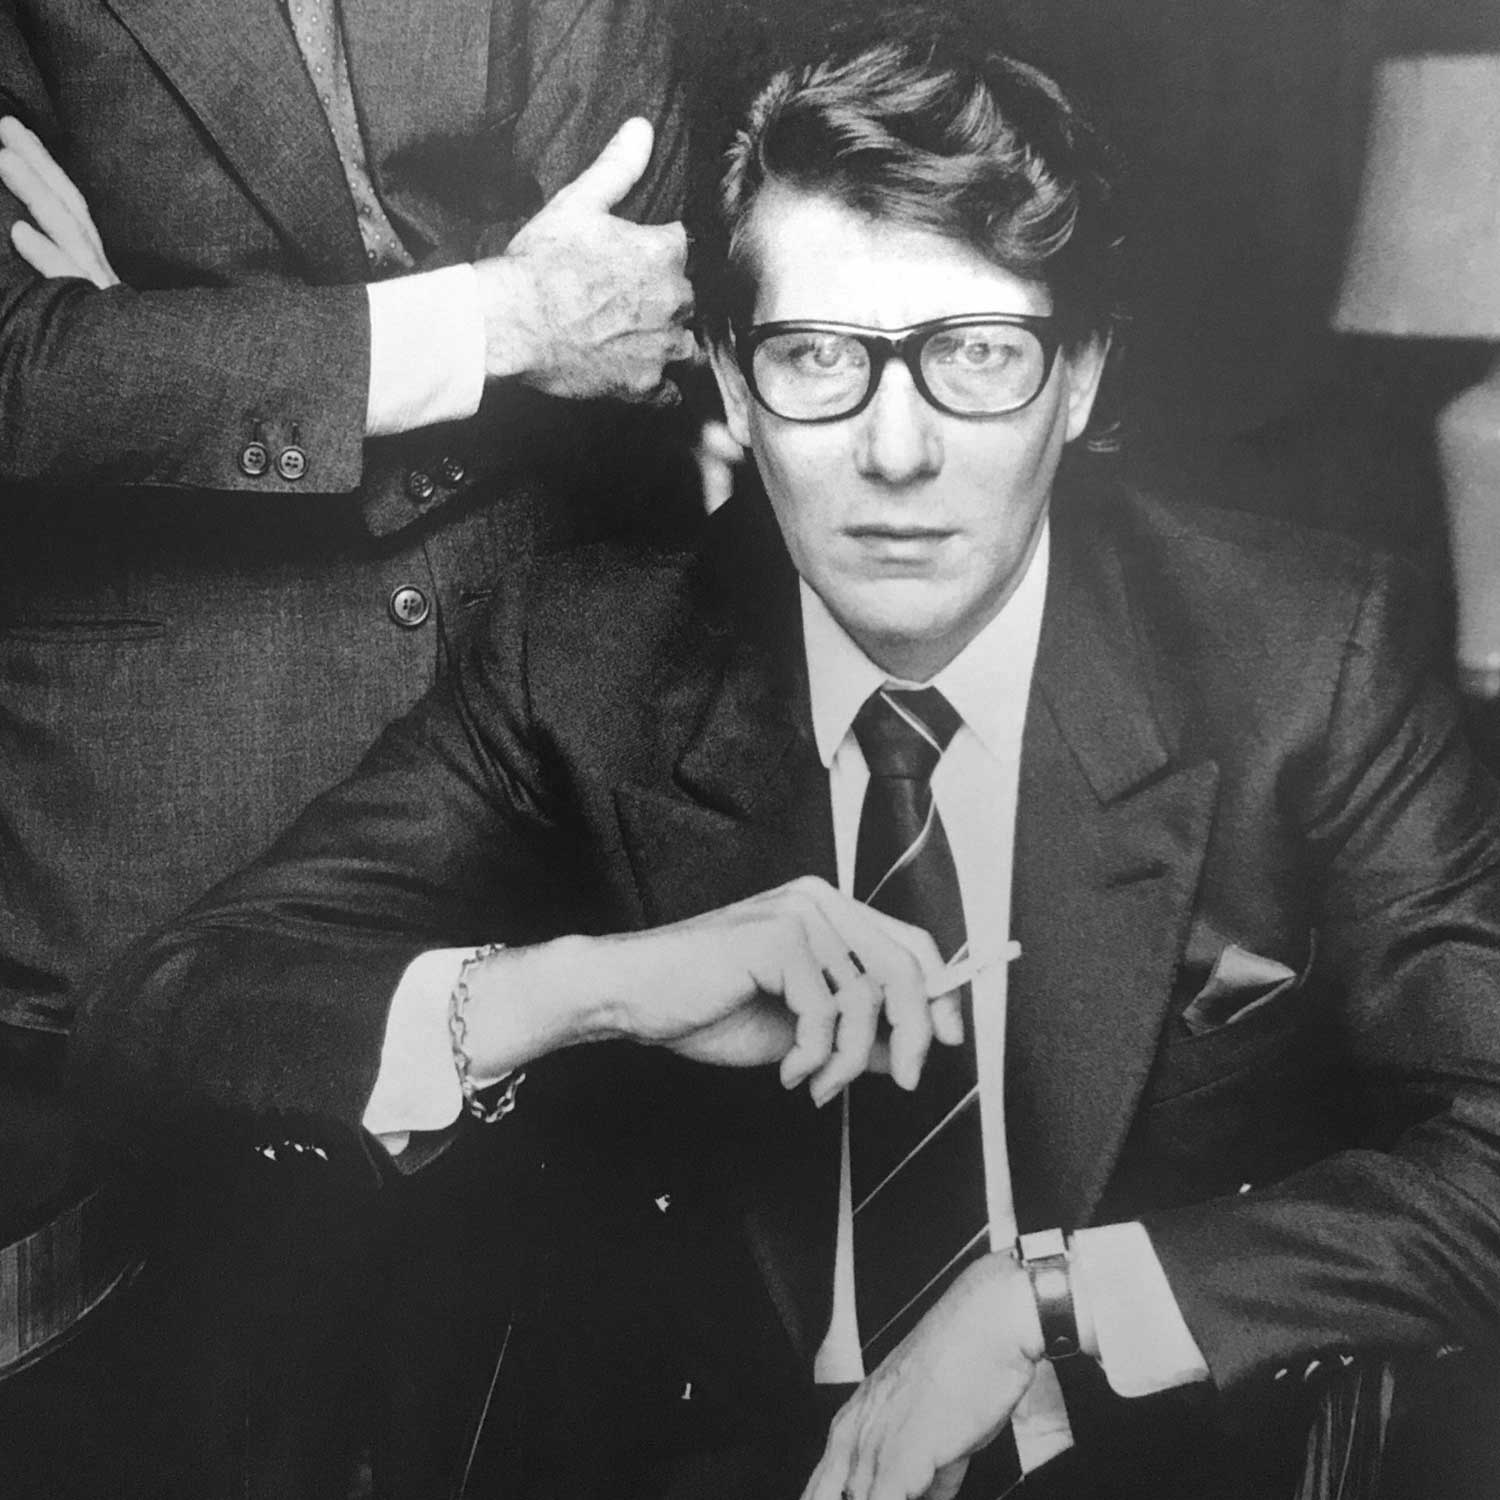 Always fashionable, the Tank on the wrist of Yves Saint Laurent